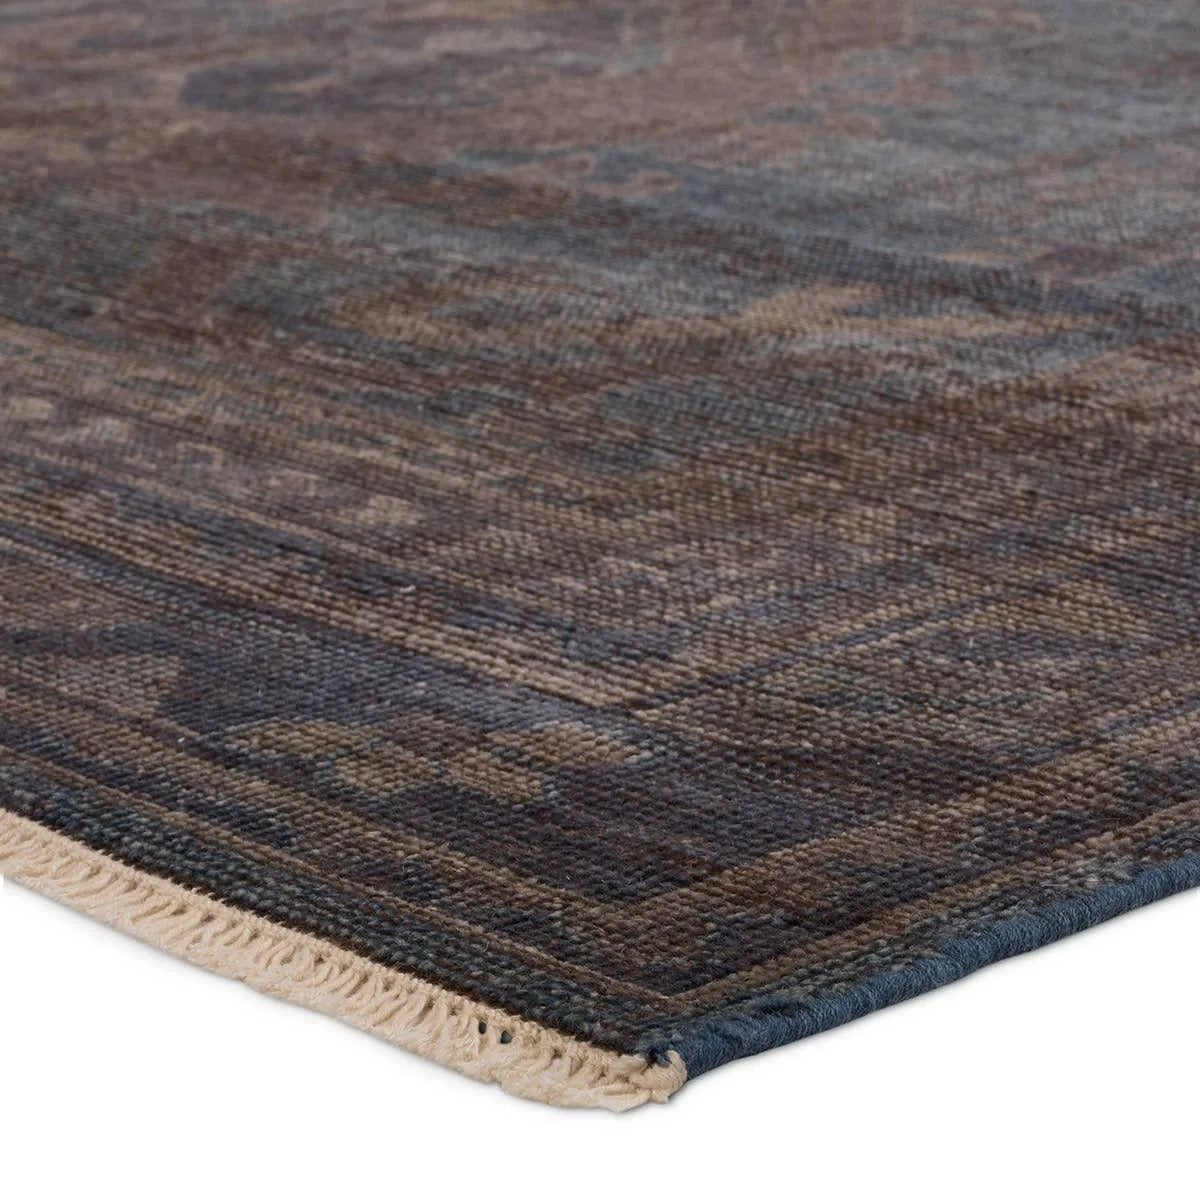 The Rhapsody Jodion features heirloom-quality designs of stunningly abrashed Old World patterns. The Jodion area rug boasts a beautifully distressed dual-medallion motif with a decorative, multi-layered border and geometric detailing. The blue, brown, and gray hues add depth and intrigue. Amethyst Home provides interior design, new home construction design consulting, vintage area rugs, and lighting in the Alpharetta metro area.